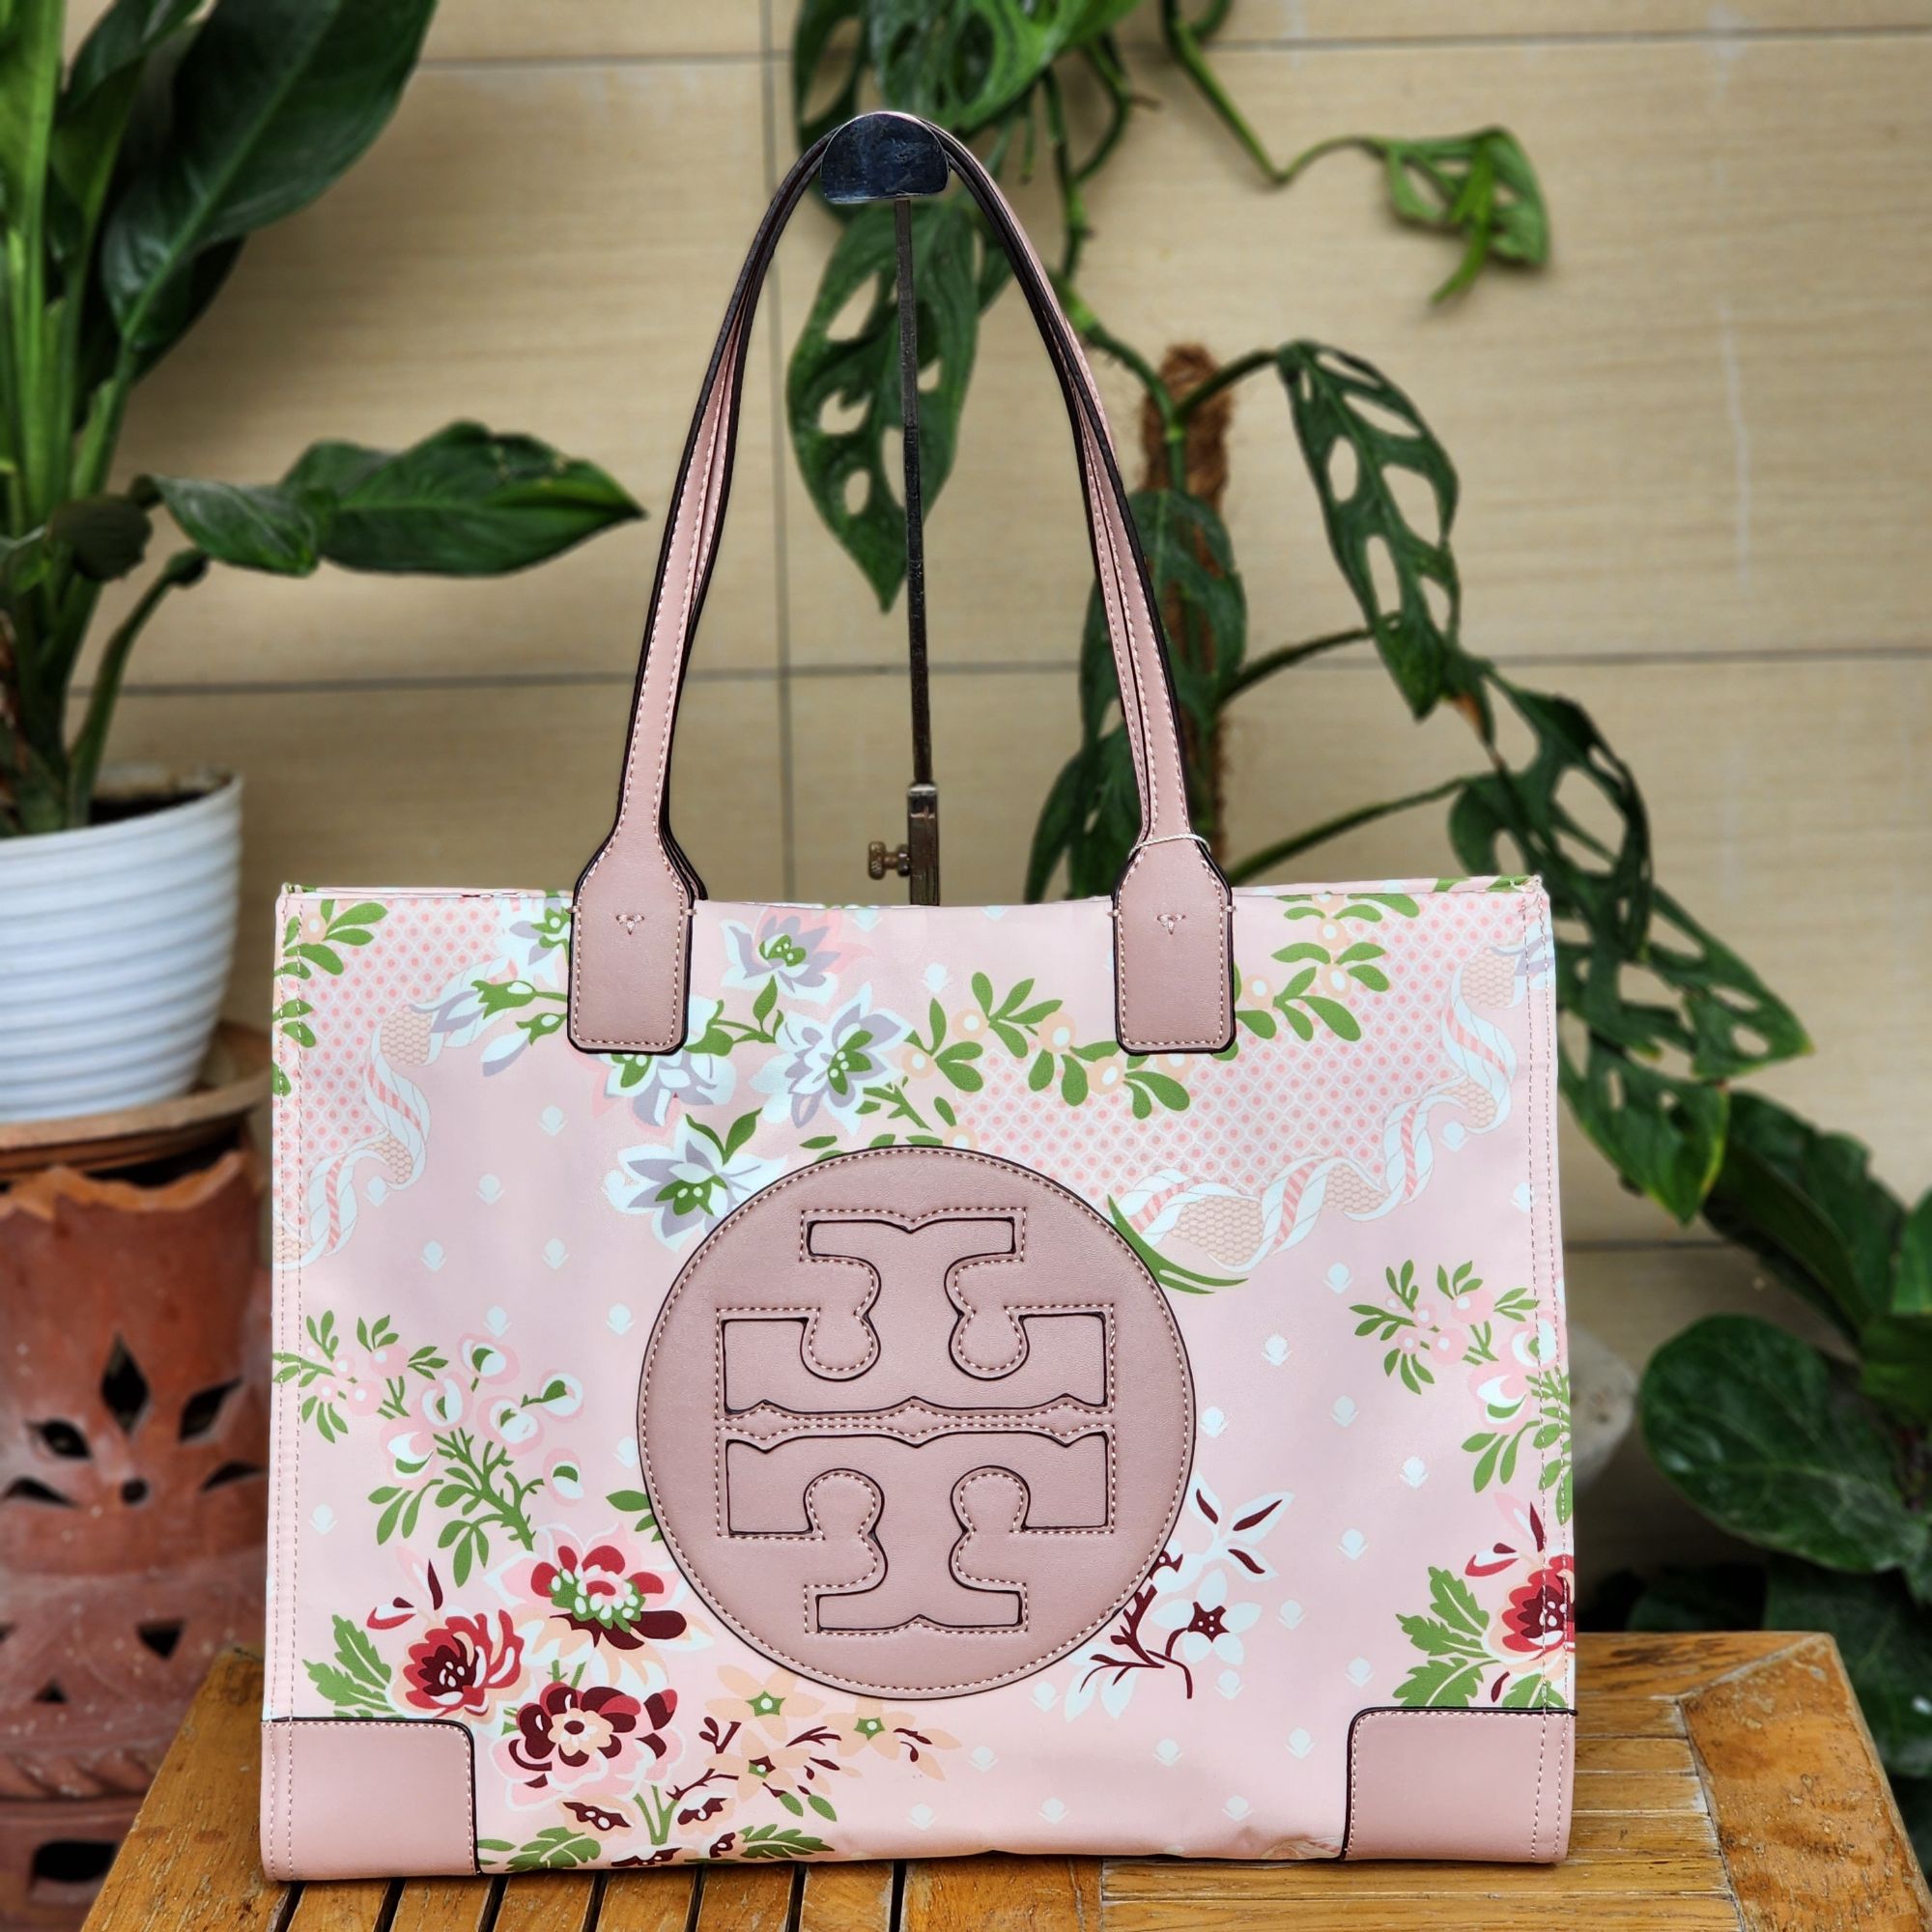 Tory Burch Ella Nylon Quilted Puffer Pink Sugar Berry Floral Tote Bag Purse  NWT